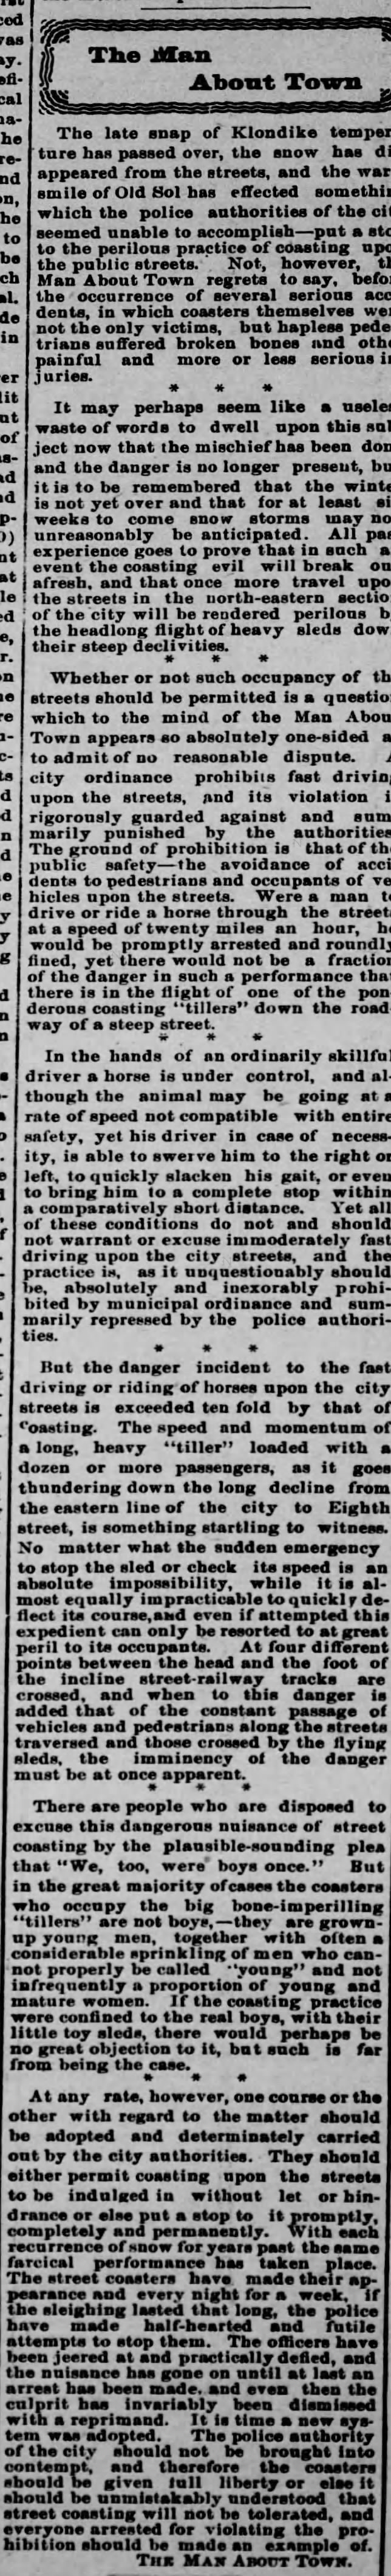 1898 editorial on tillers